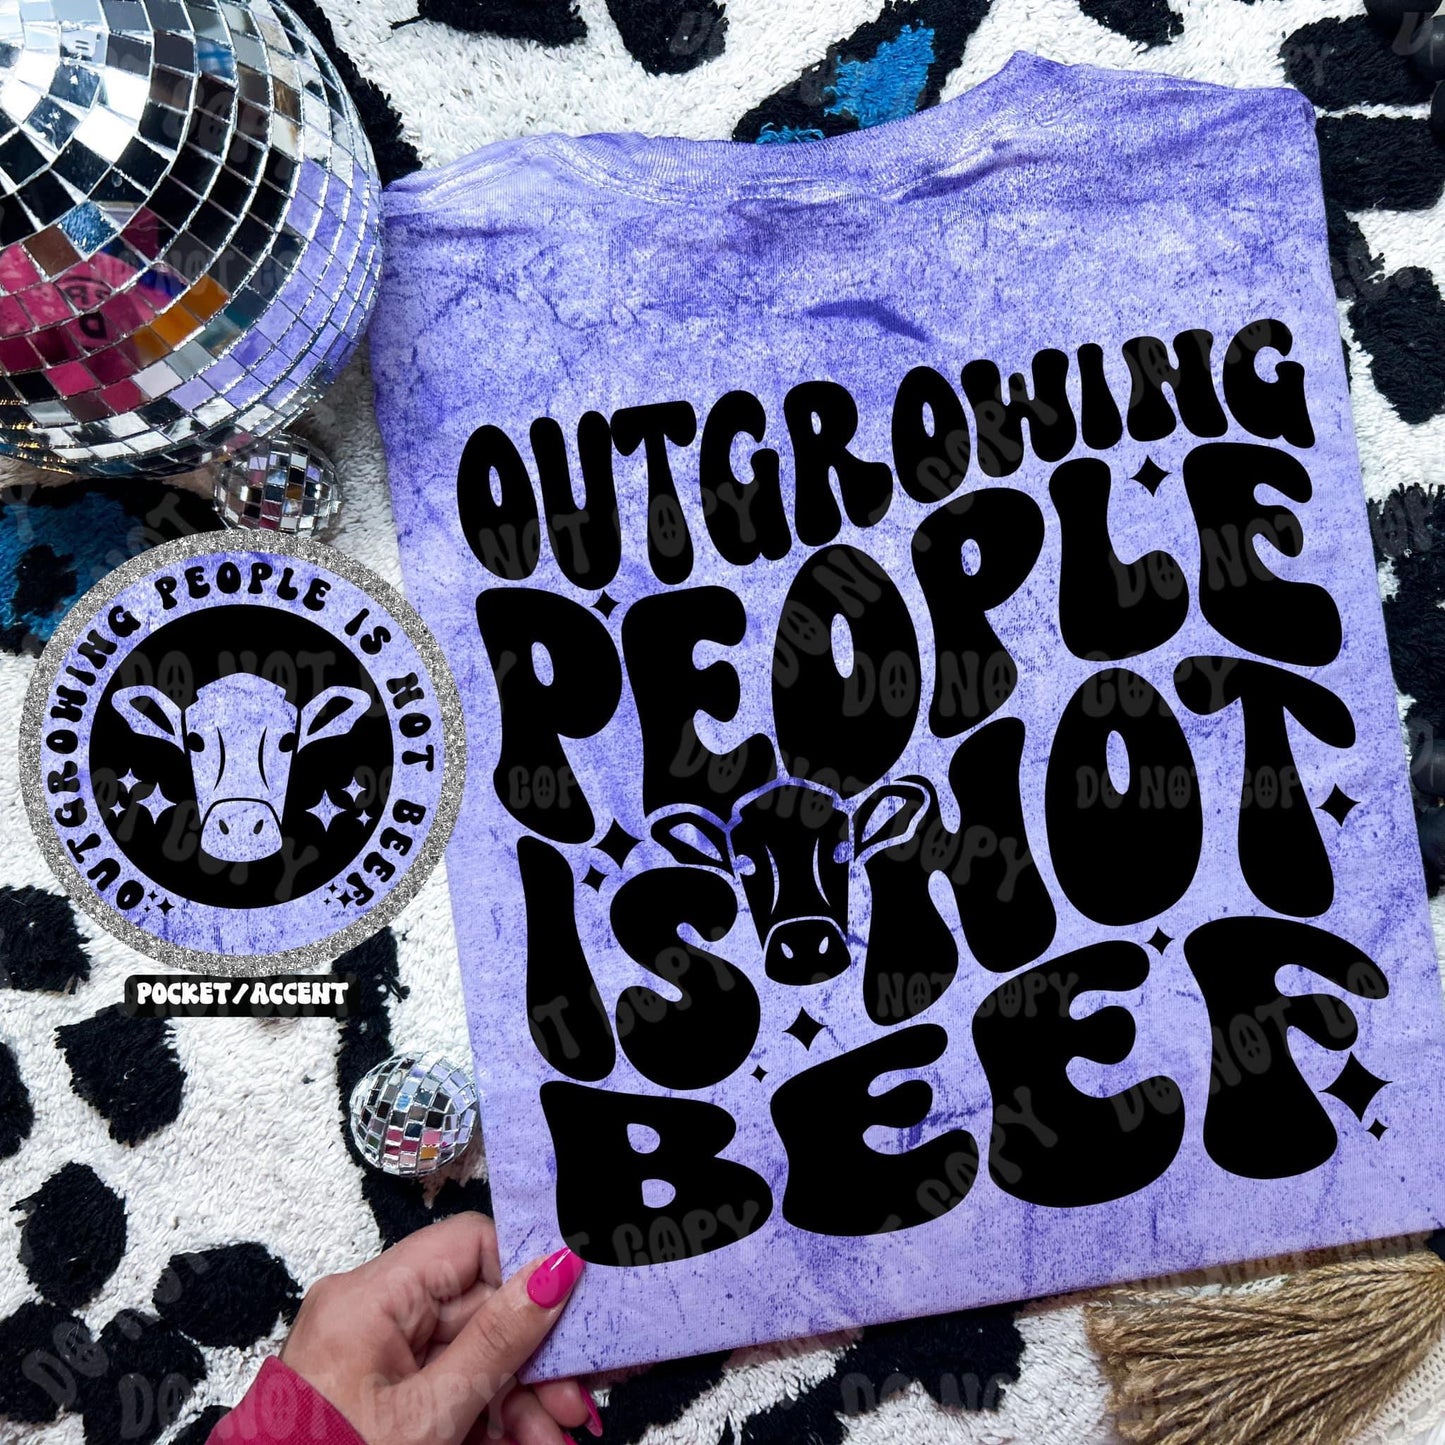 Outgrowing People Is Not Beef